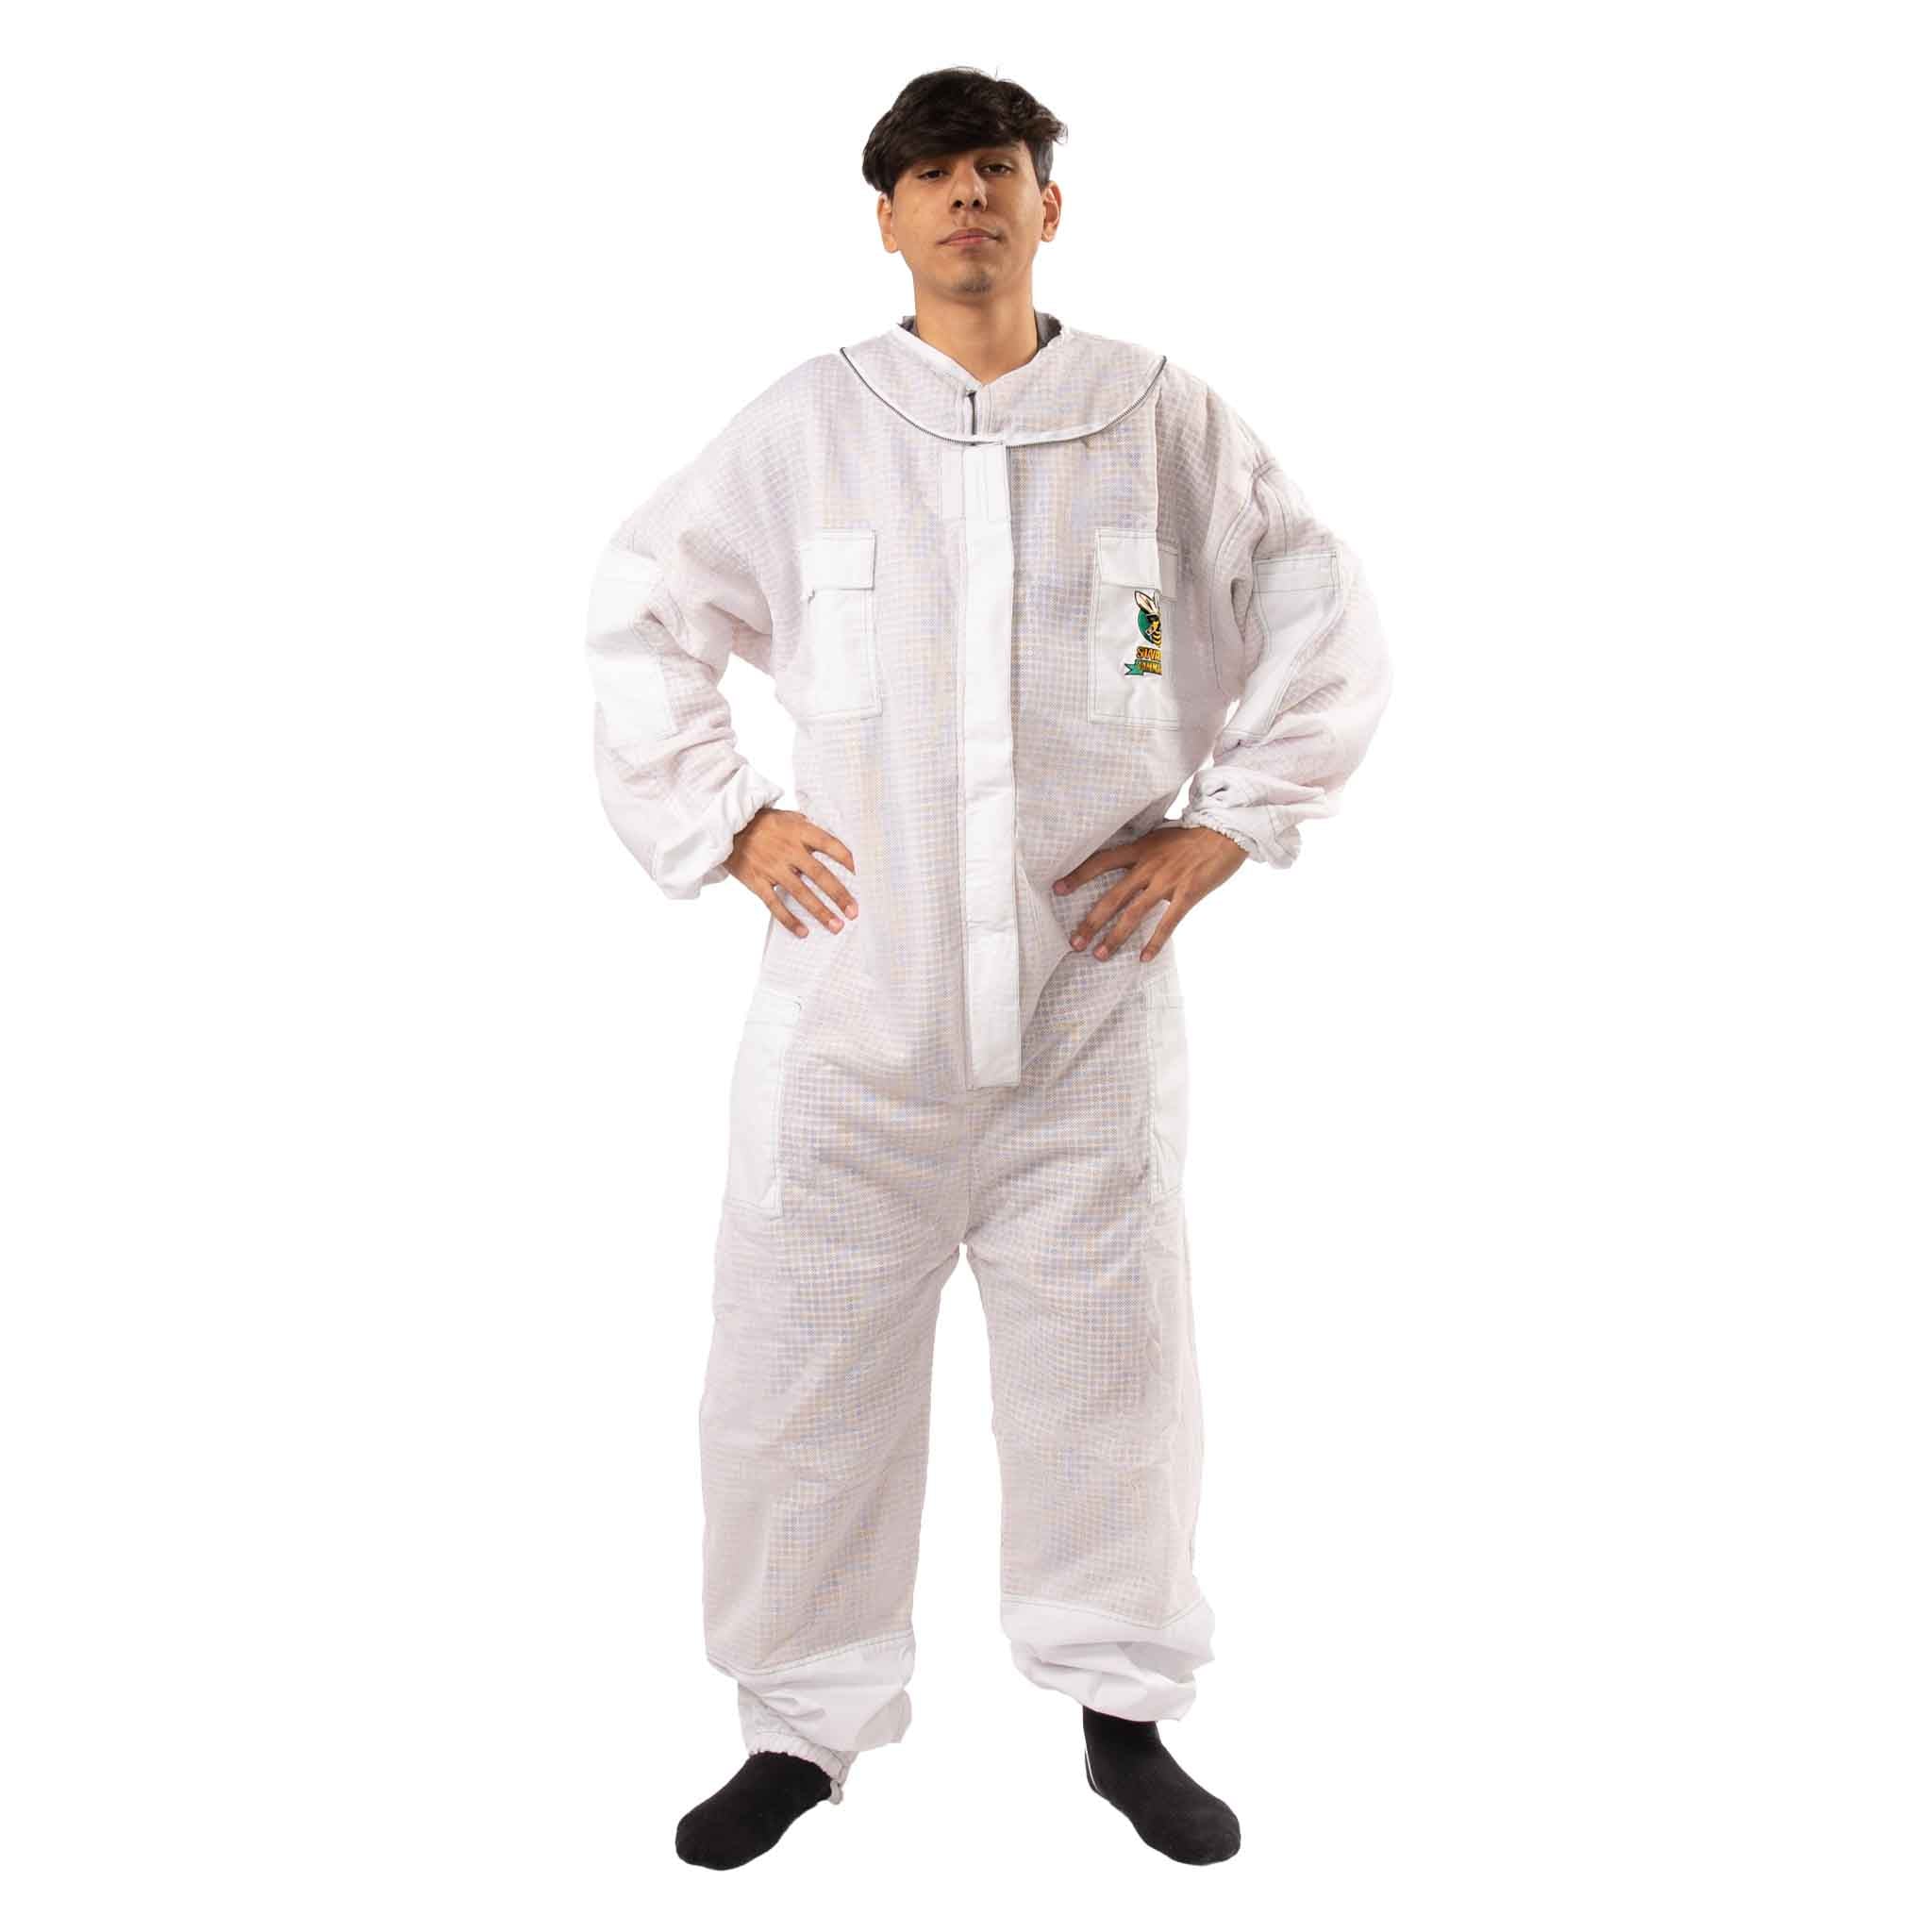 Swarm Commander 3-Layer Mesh Fully Ventilated Suit